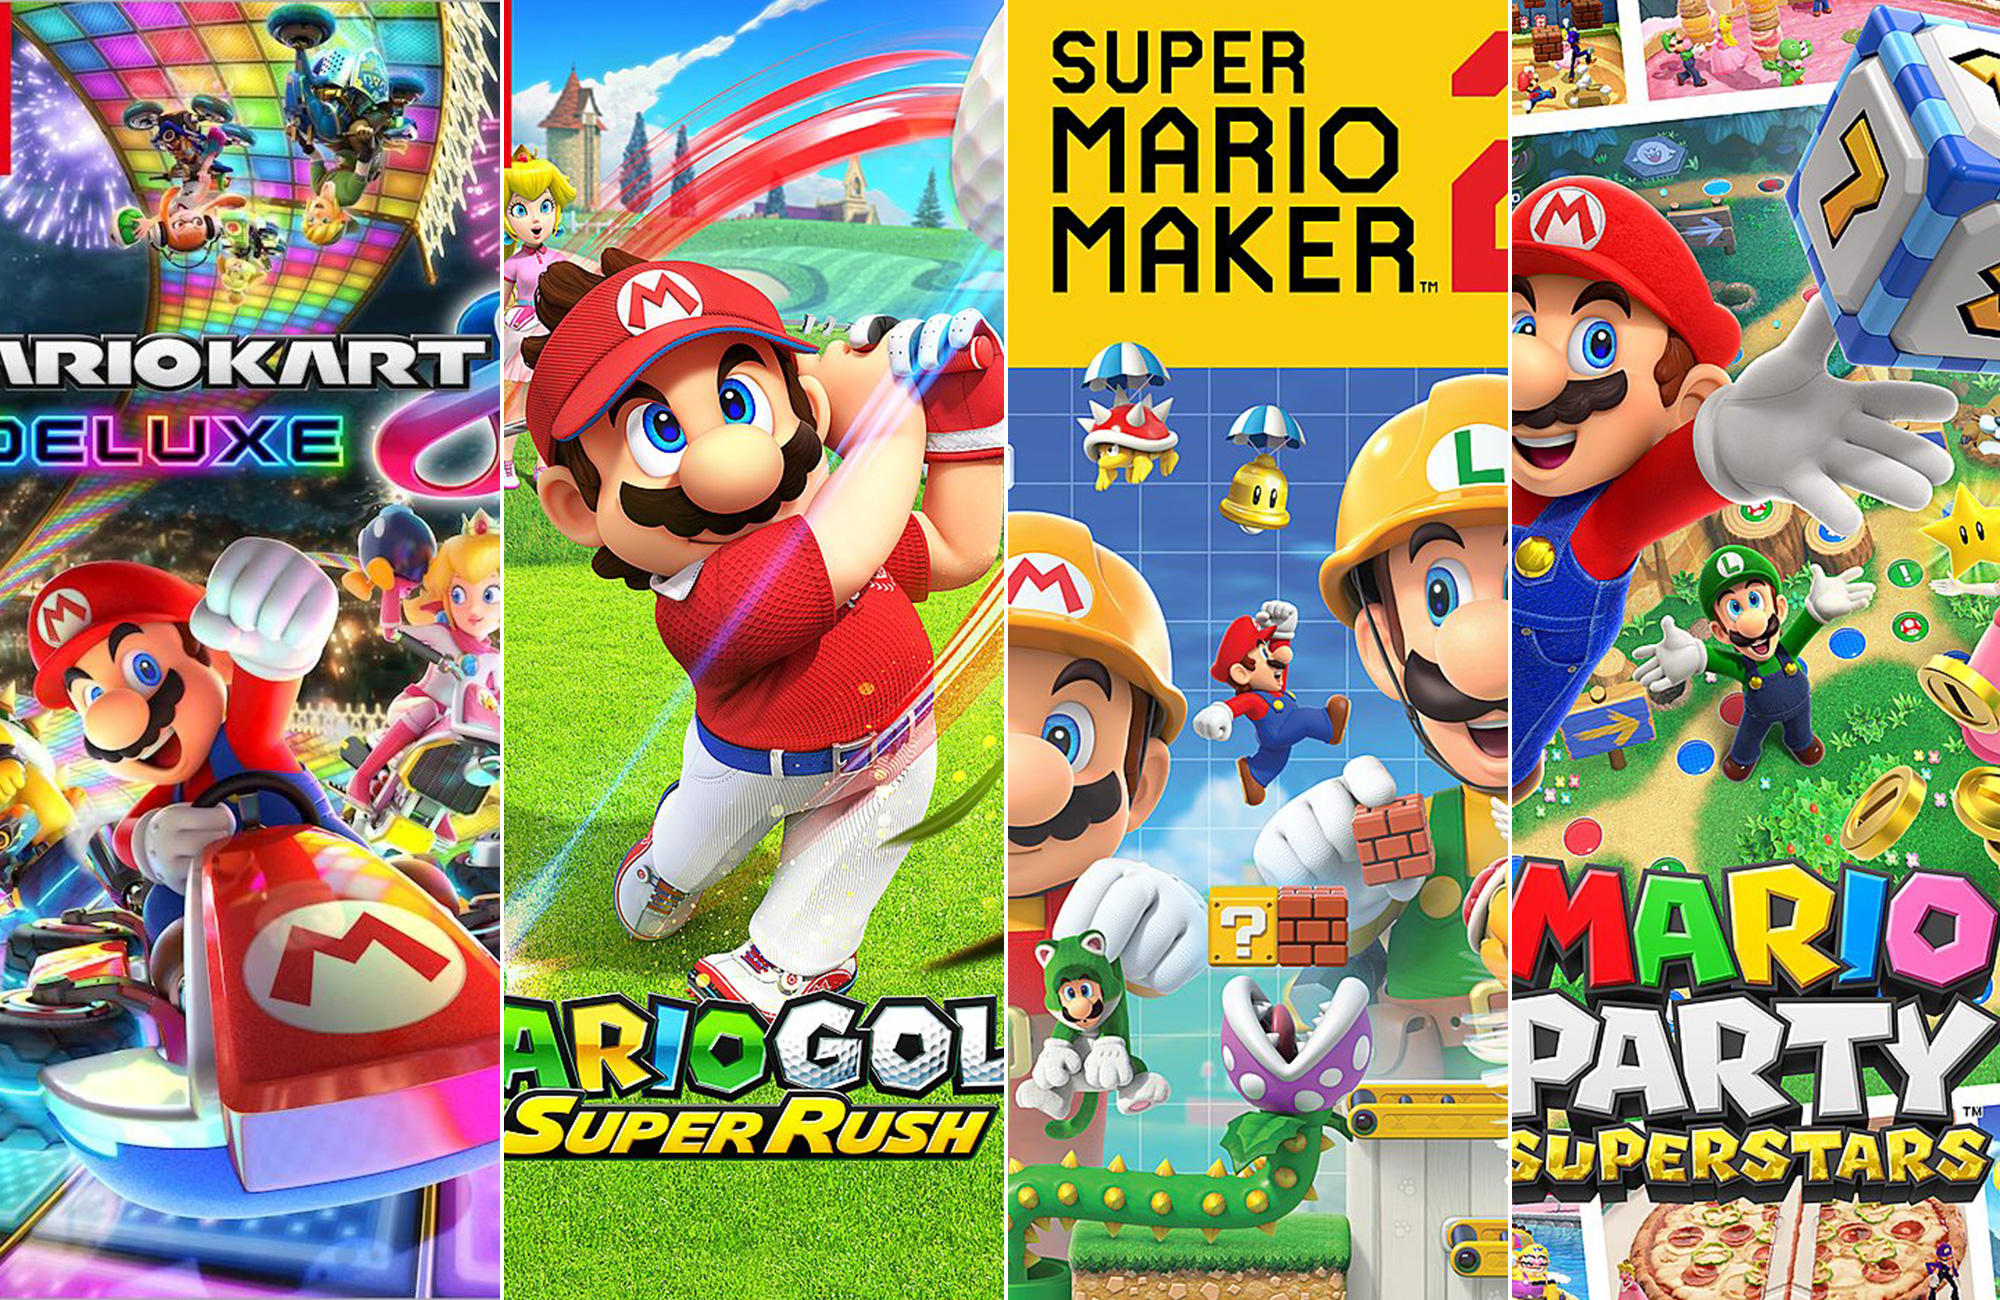 Buy is rare Switch game deals for Mar10 Day | Popular Science